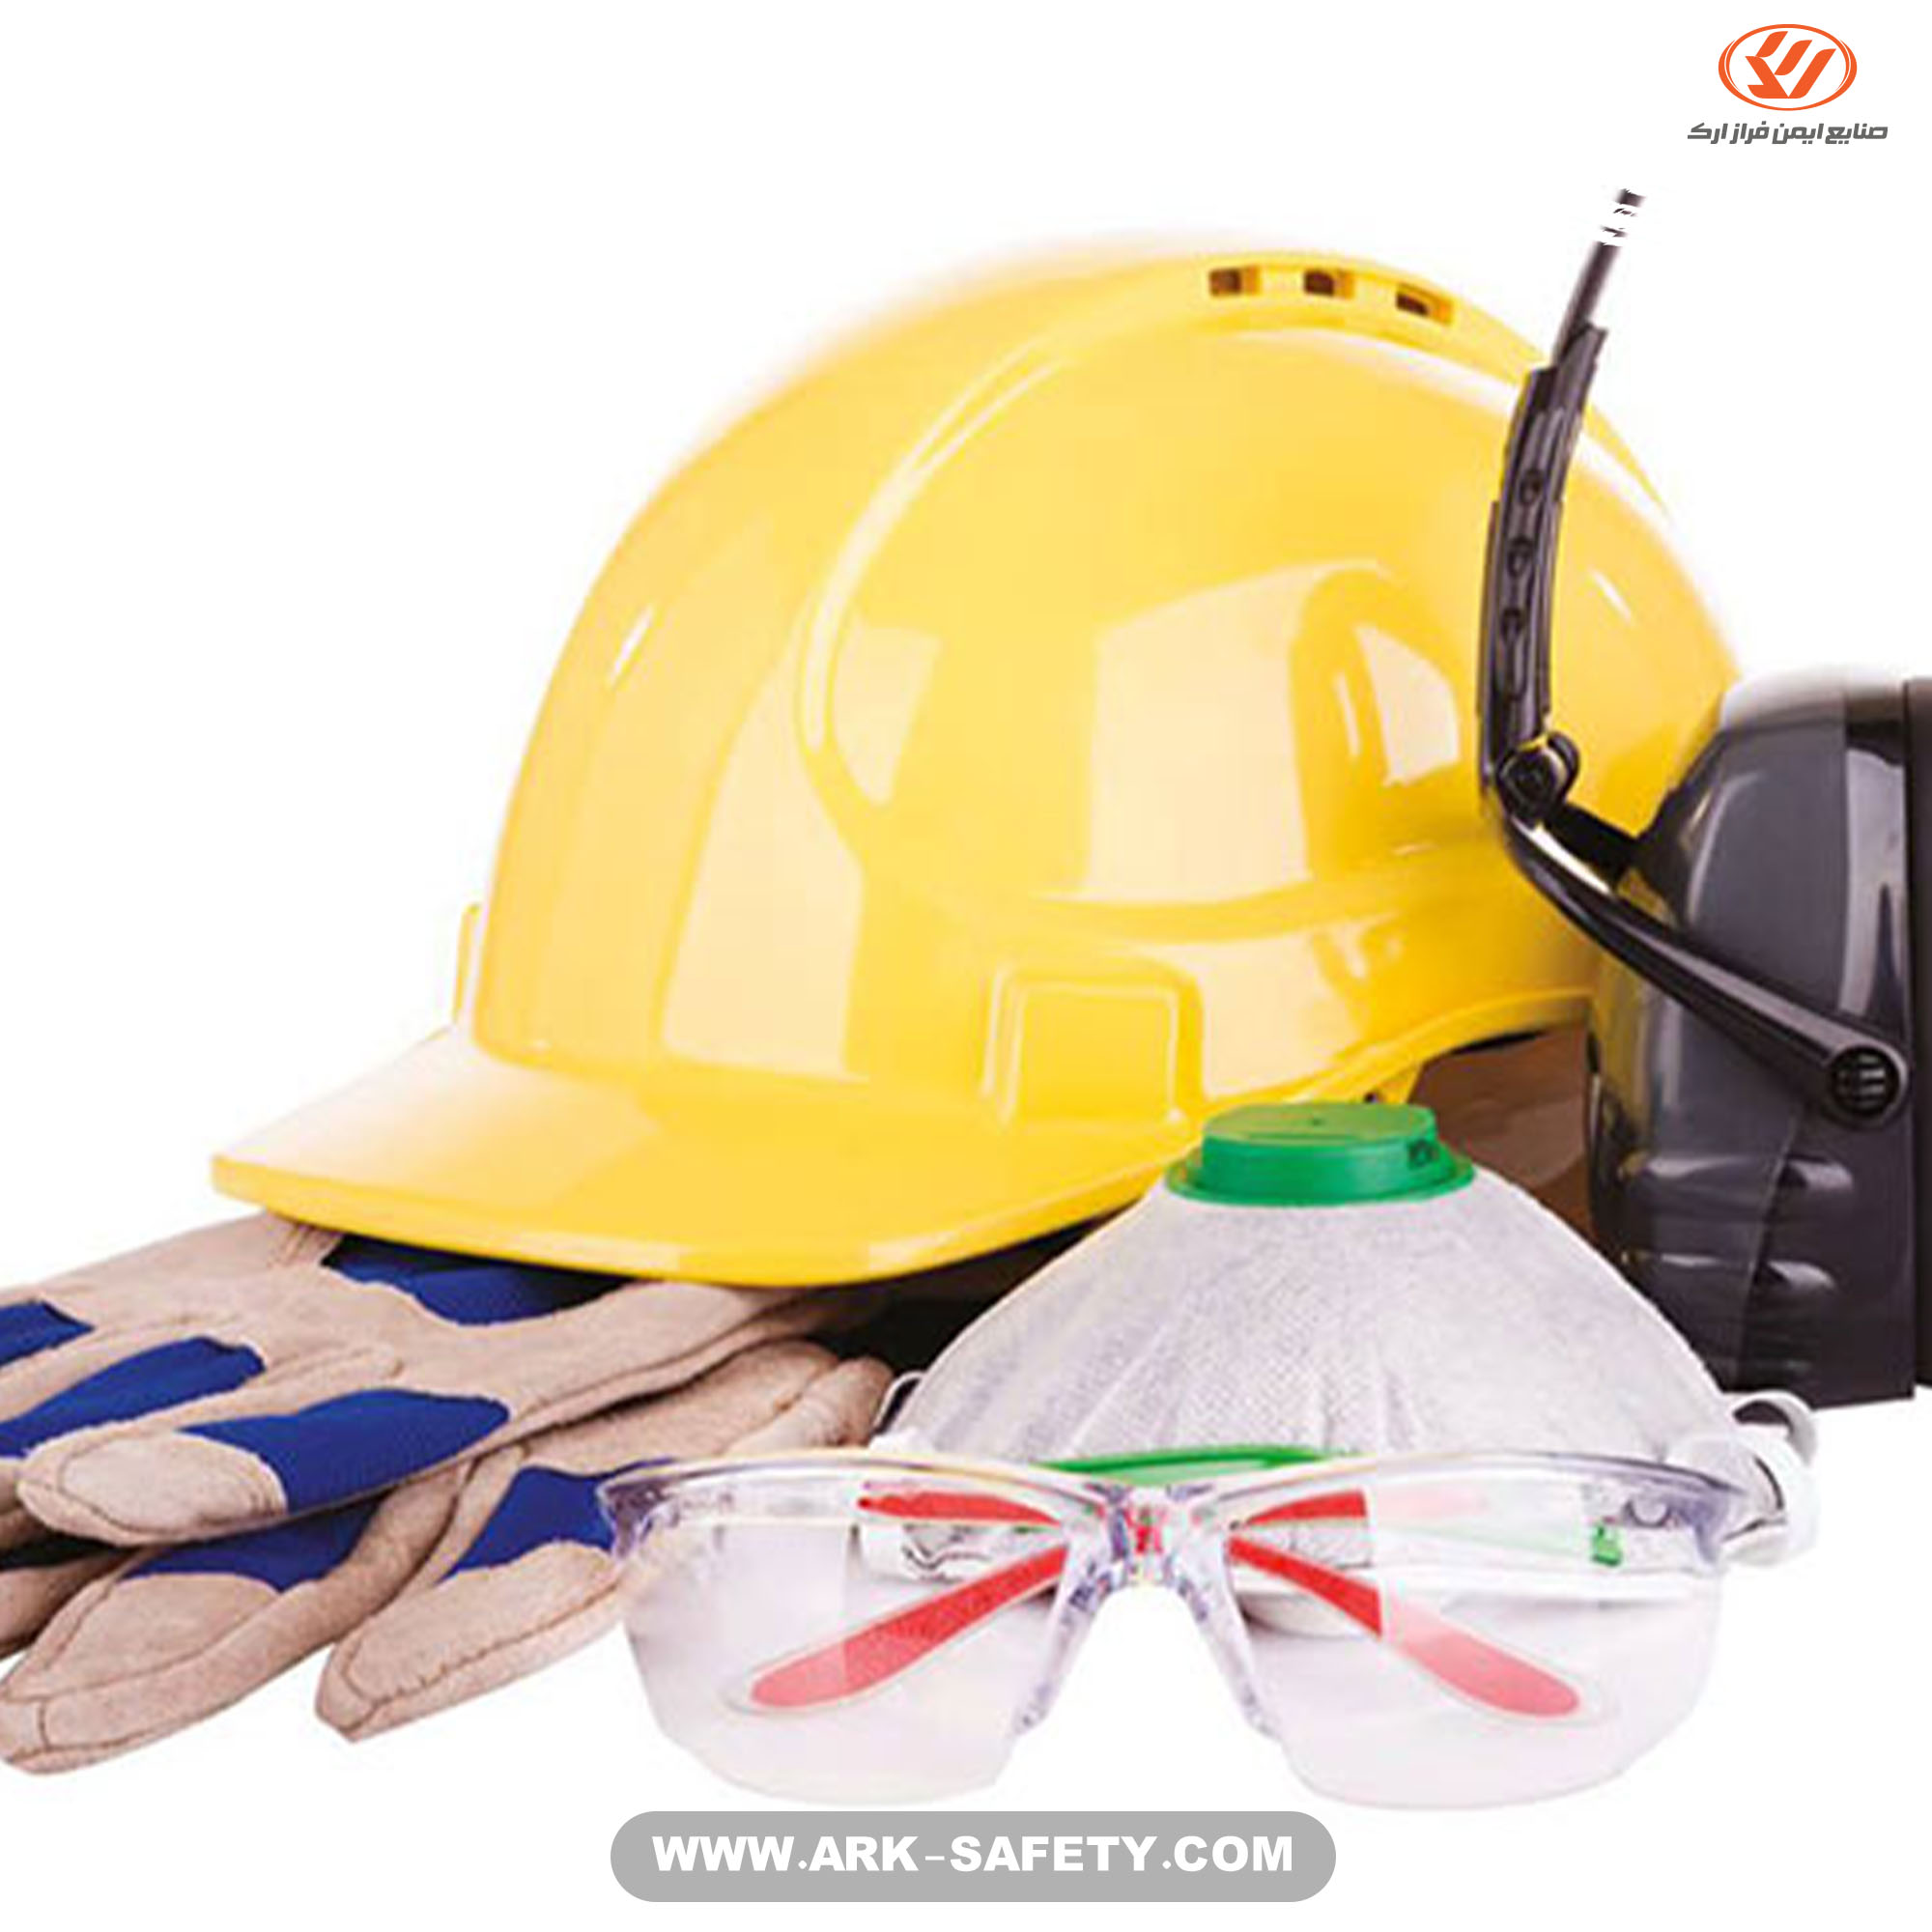 Use and inspect personal safety tools and equipment